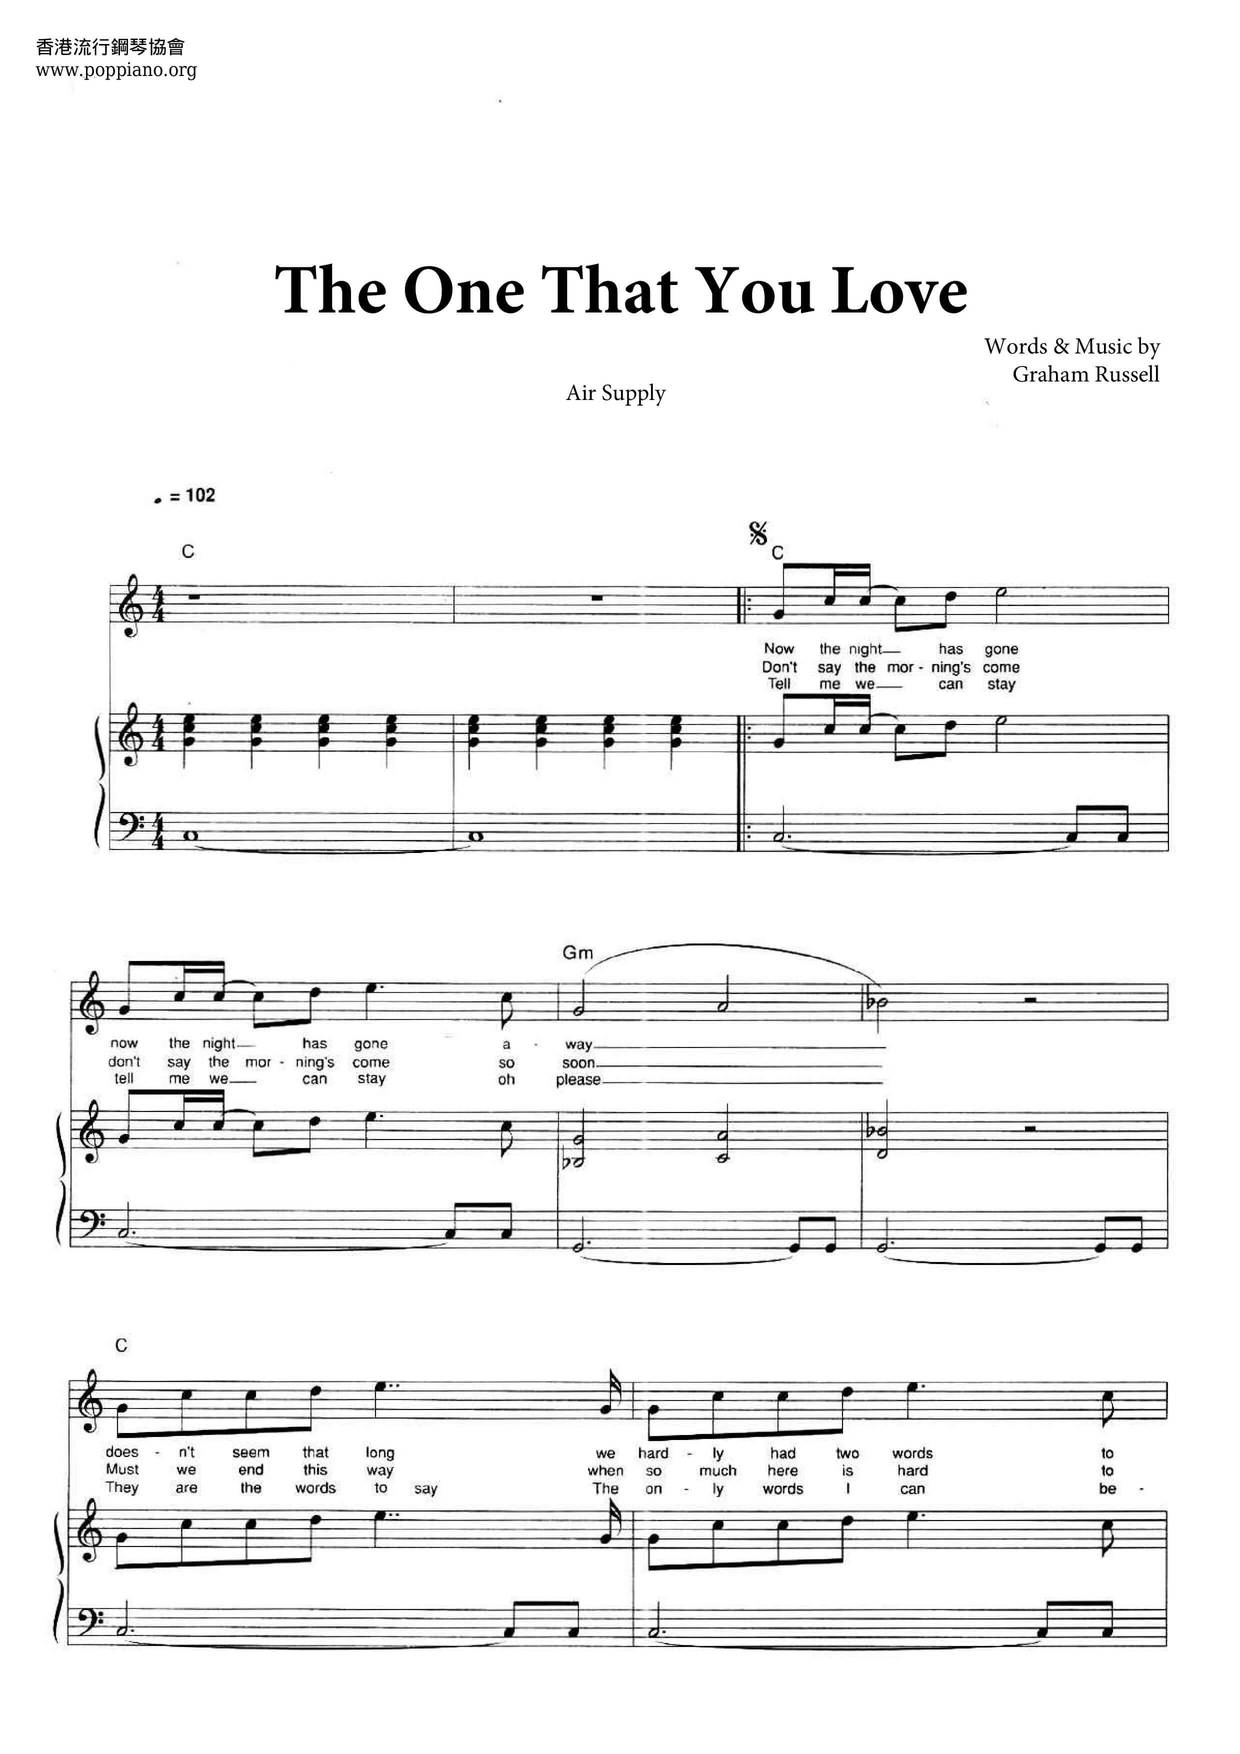 The One That You Love Score